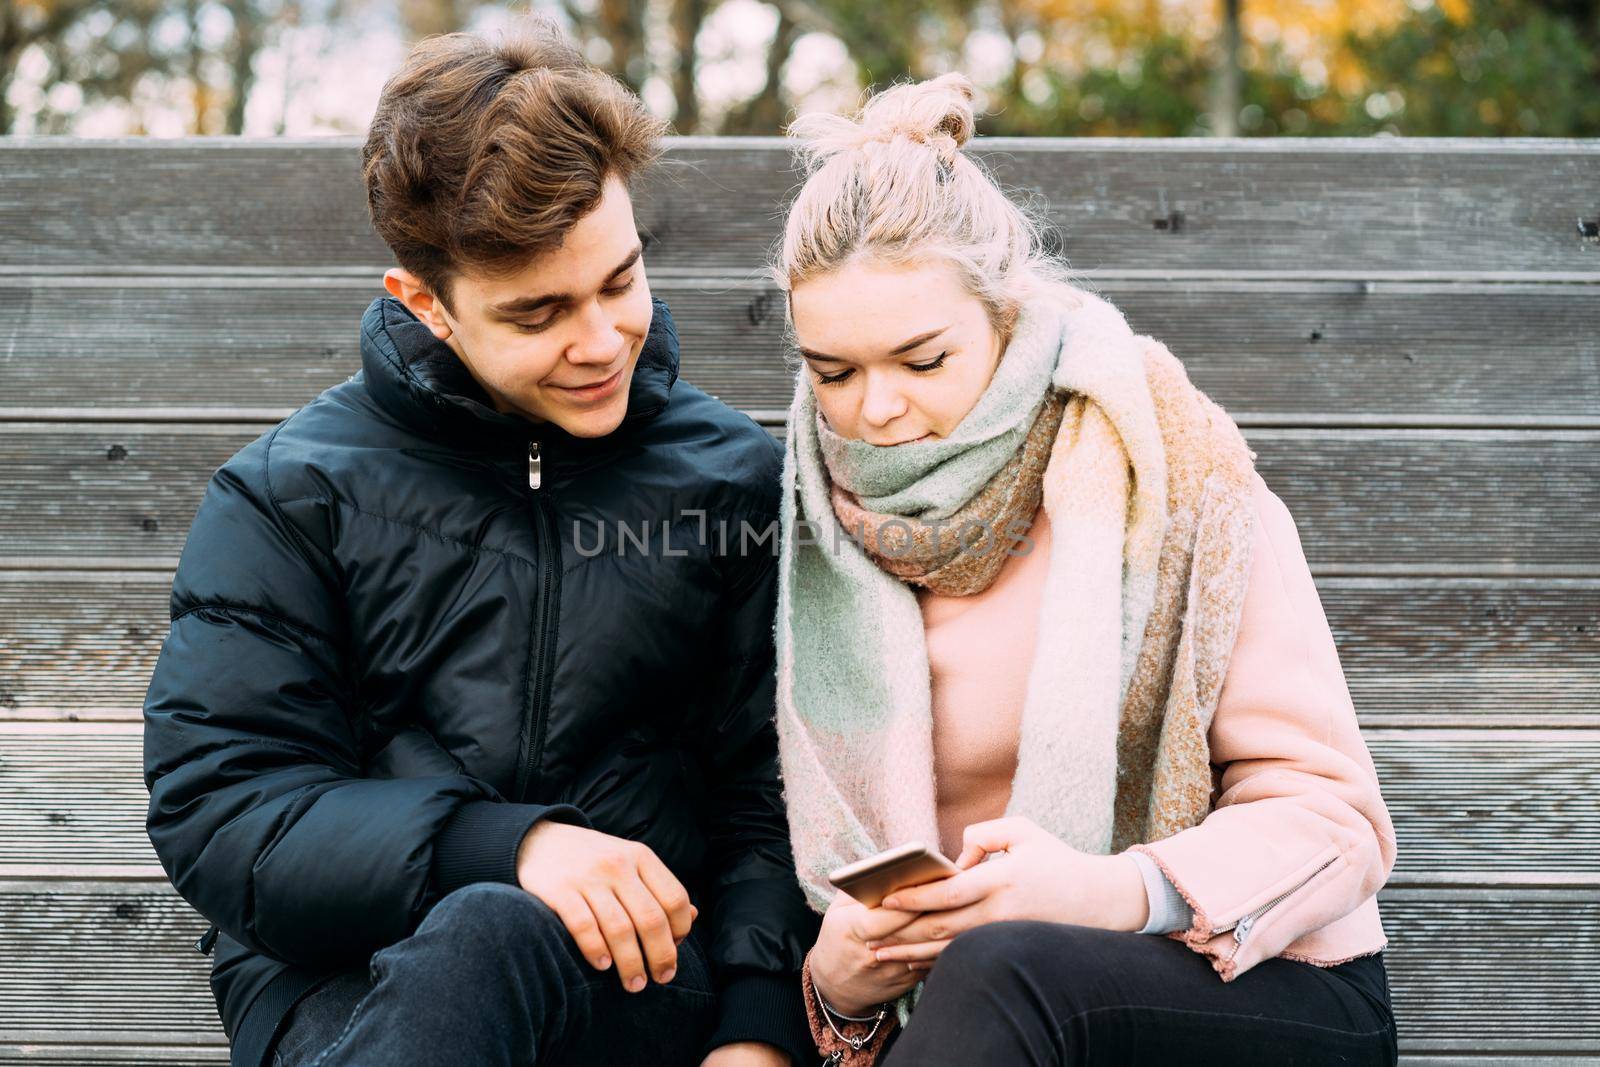 Loving teenagers on date look at mobile phones, girl shows guy something interesting on a mobile phone. Immersion in virtual world, social networks. Concept of teen love, Smombie dating